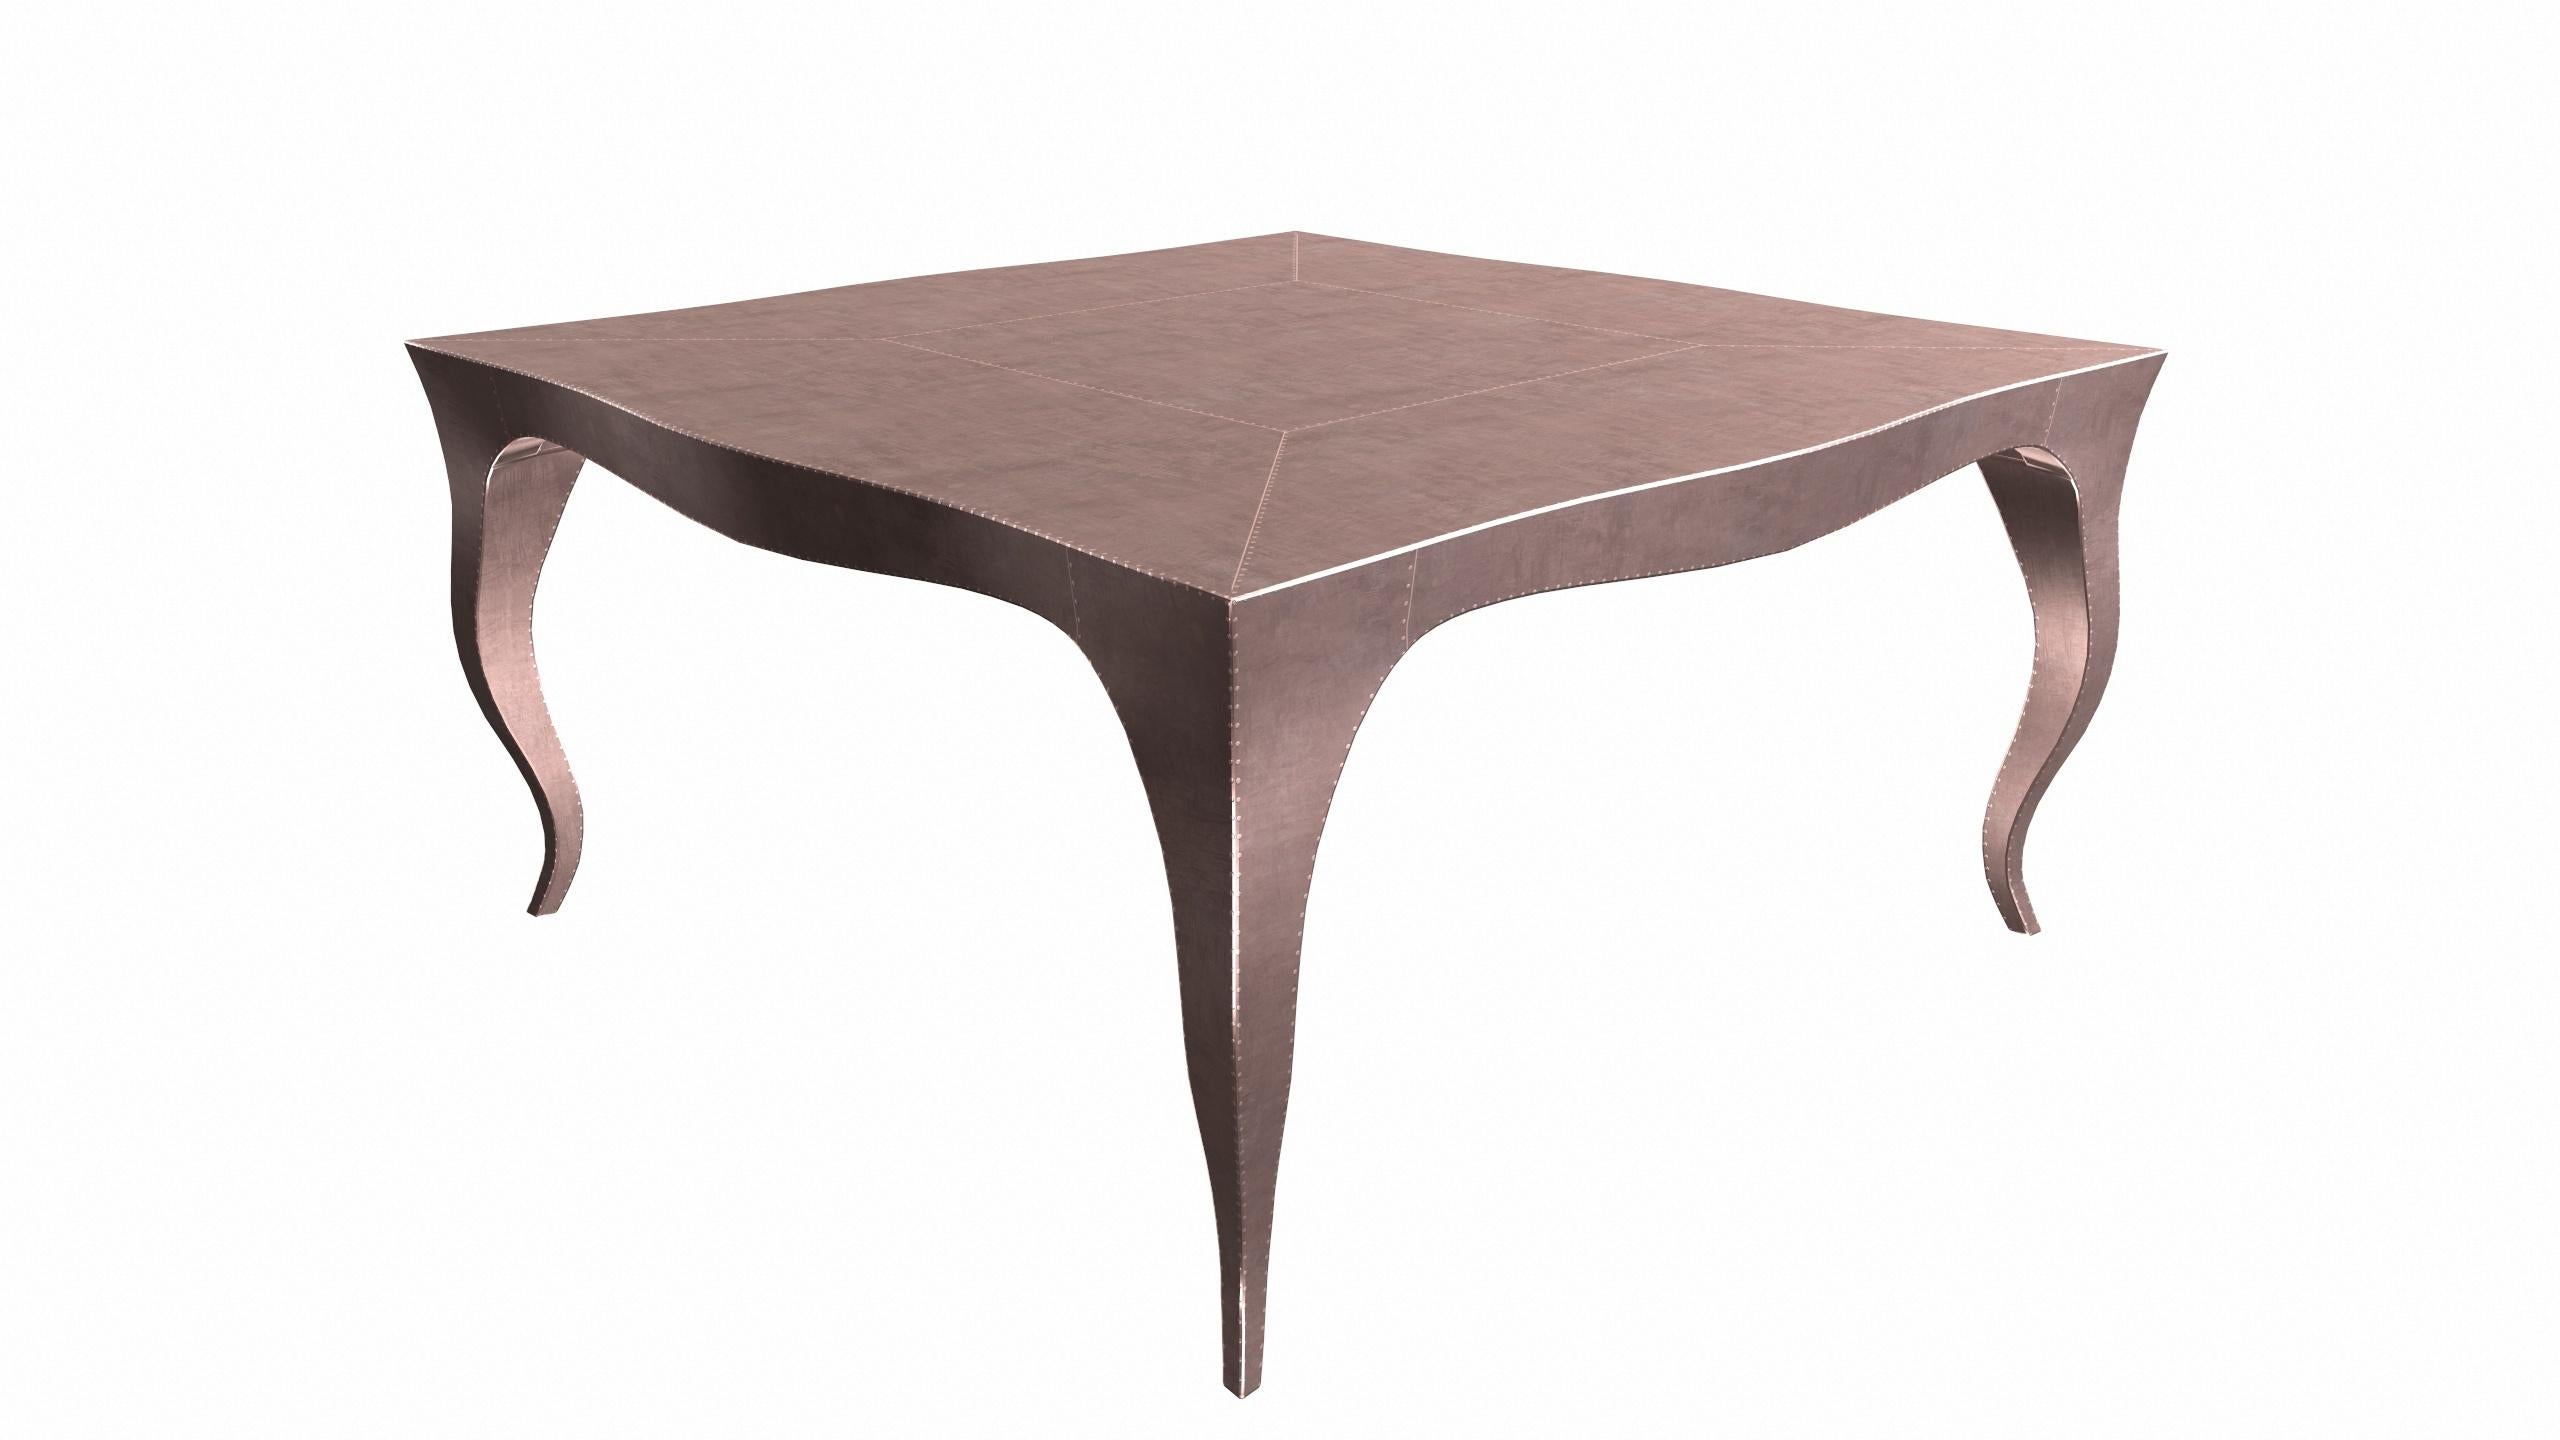 American Louise Art Deco Center Tables Smooth Copper by Paul Mathieu for S.Odegard For Sale